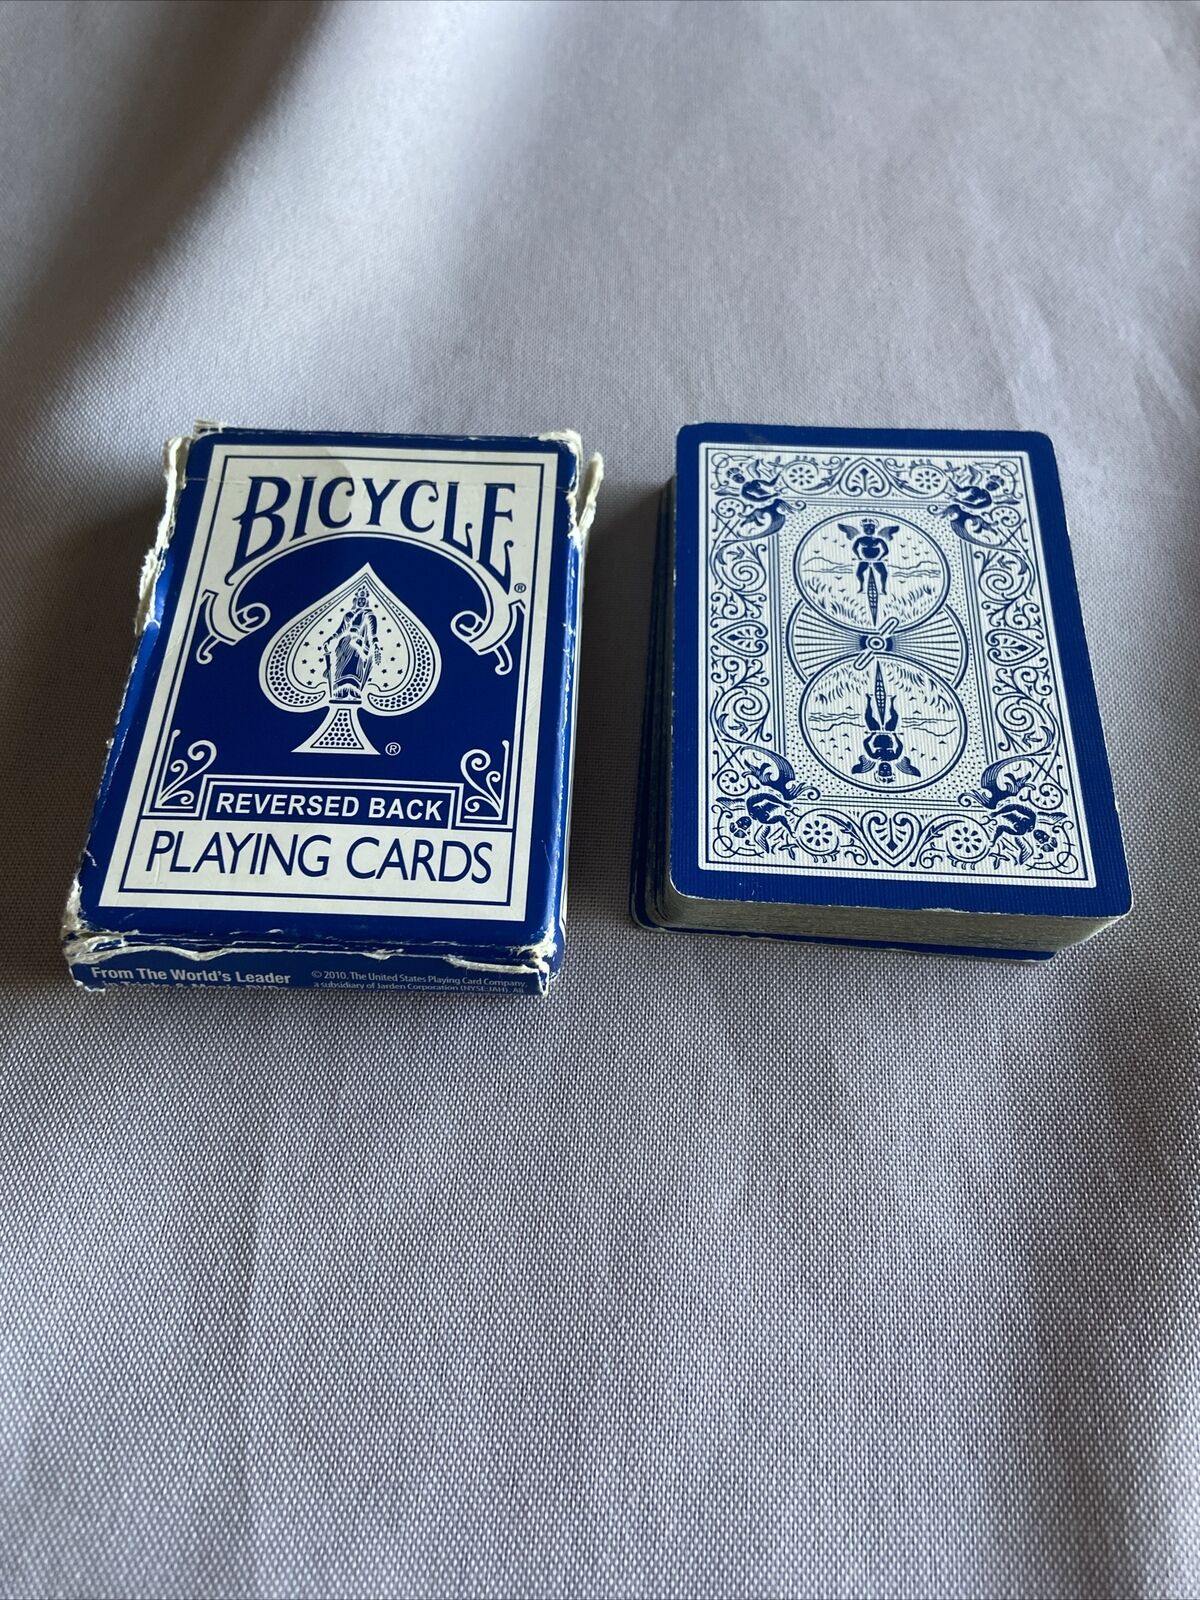 Bicycle Reversed Back Playing Cards - Blue